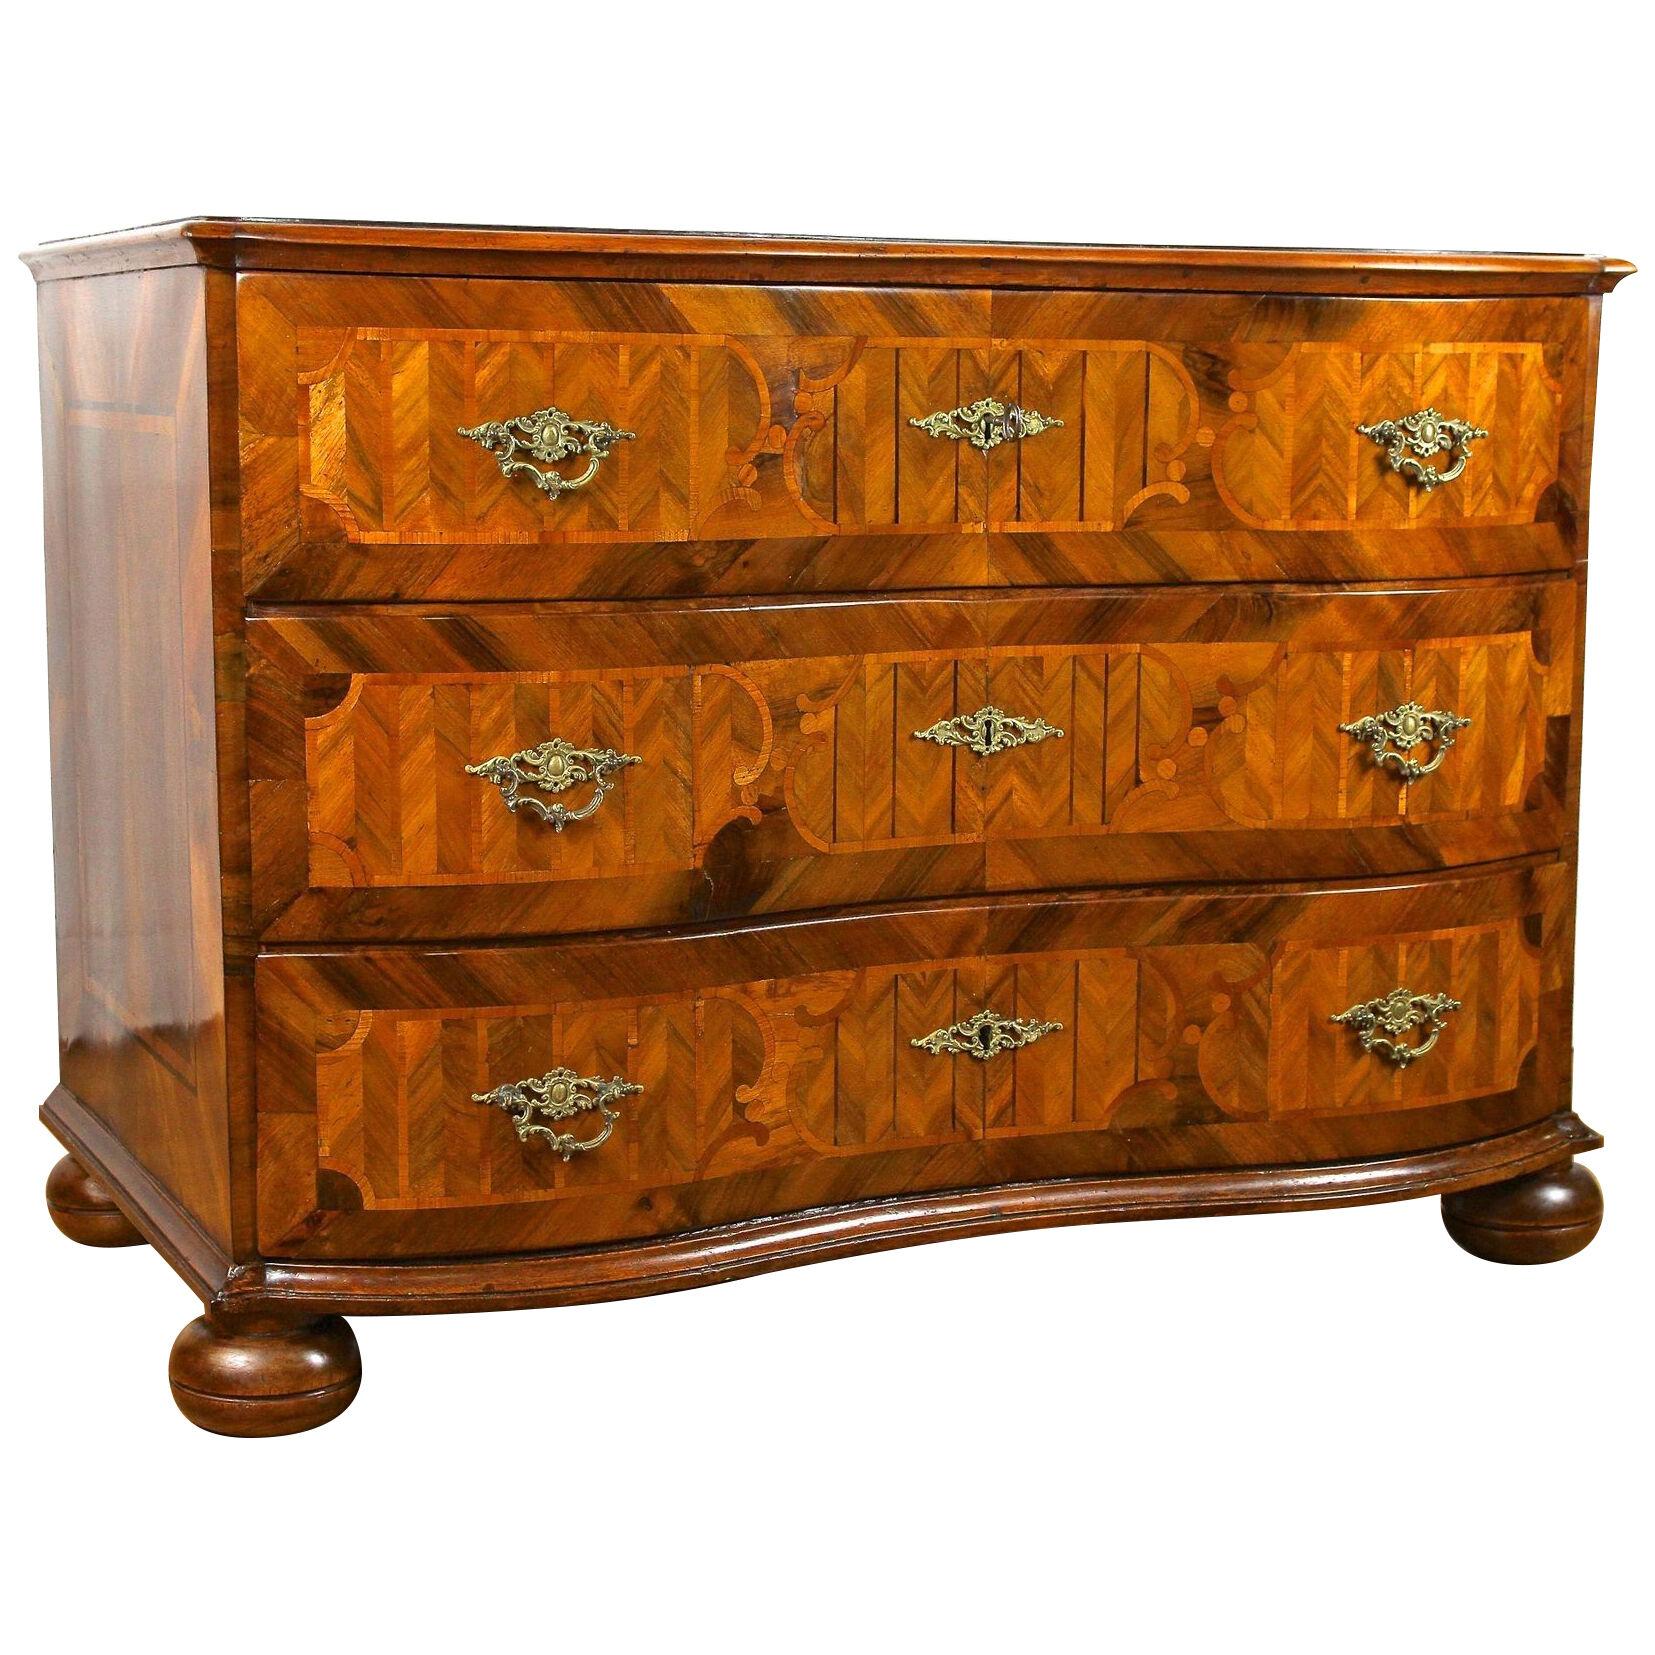 18th Century Baroque Chest Of Drawers With Marquetry Works, Austria circa 1770